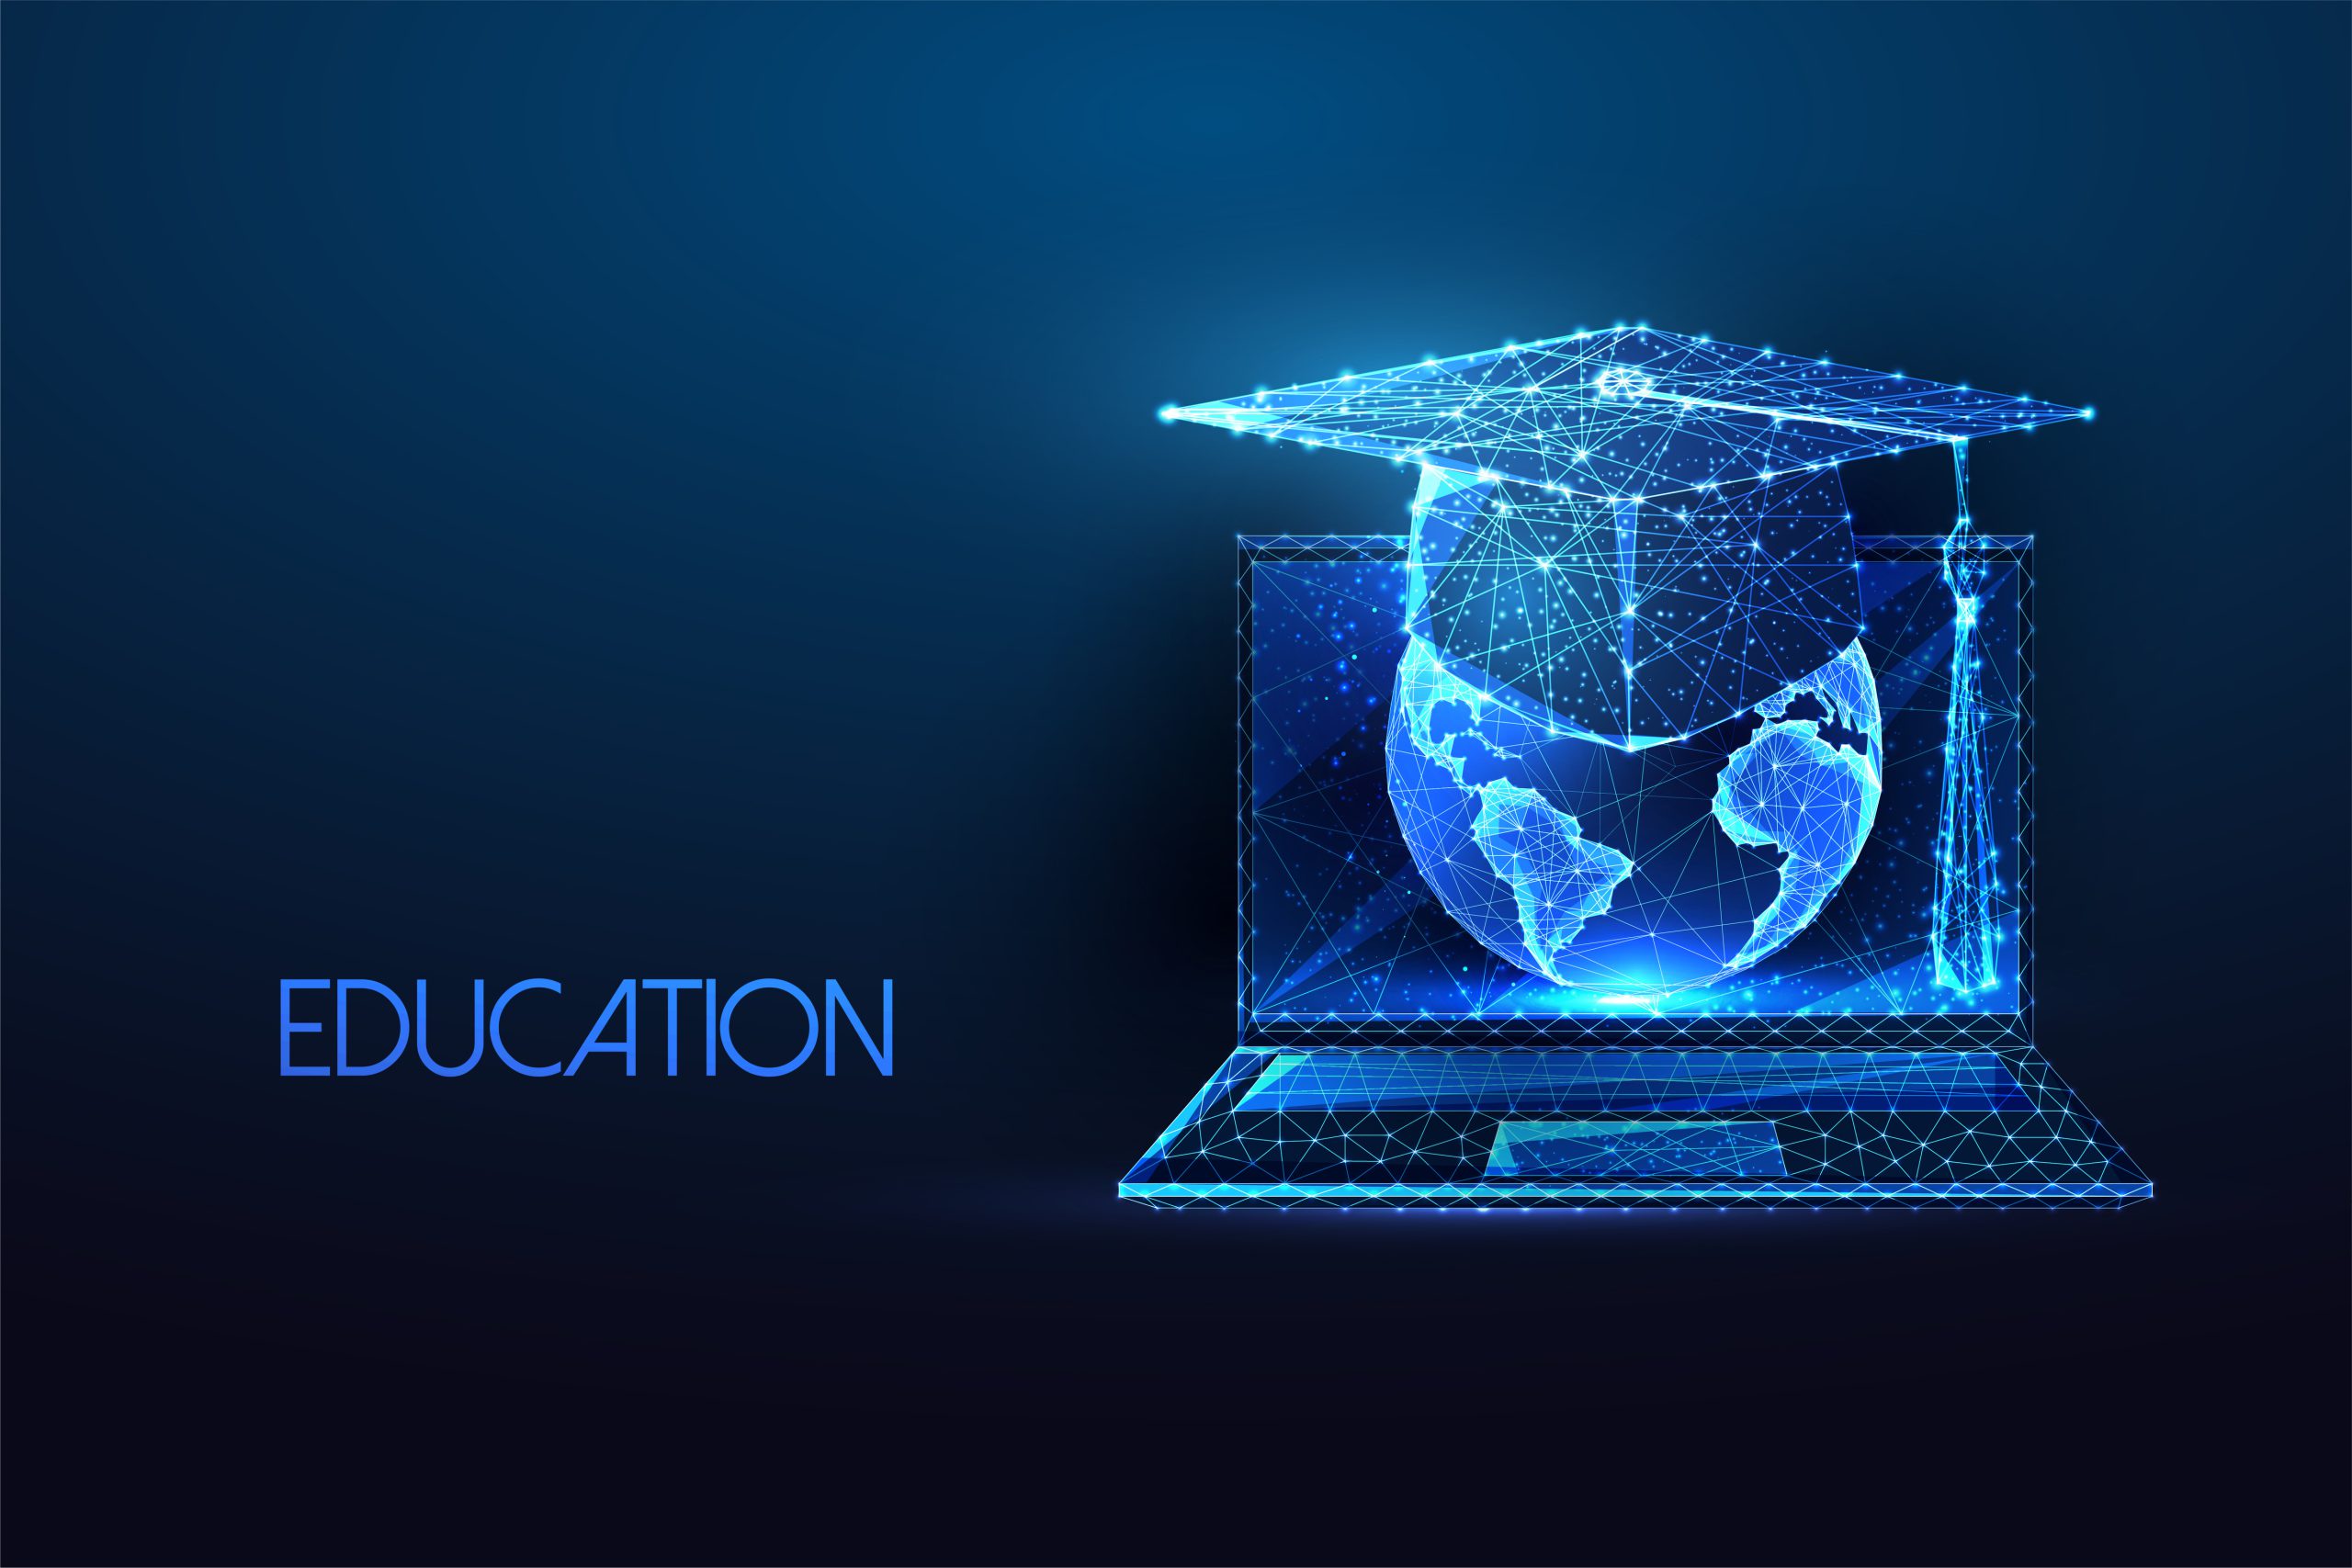 Concept of global online education with laptop, planet Earth and graduation cap in futuristic style